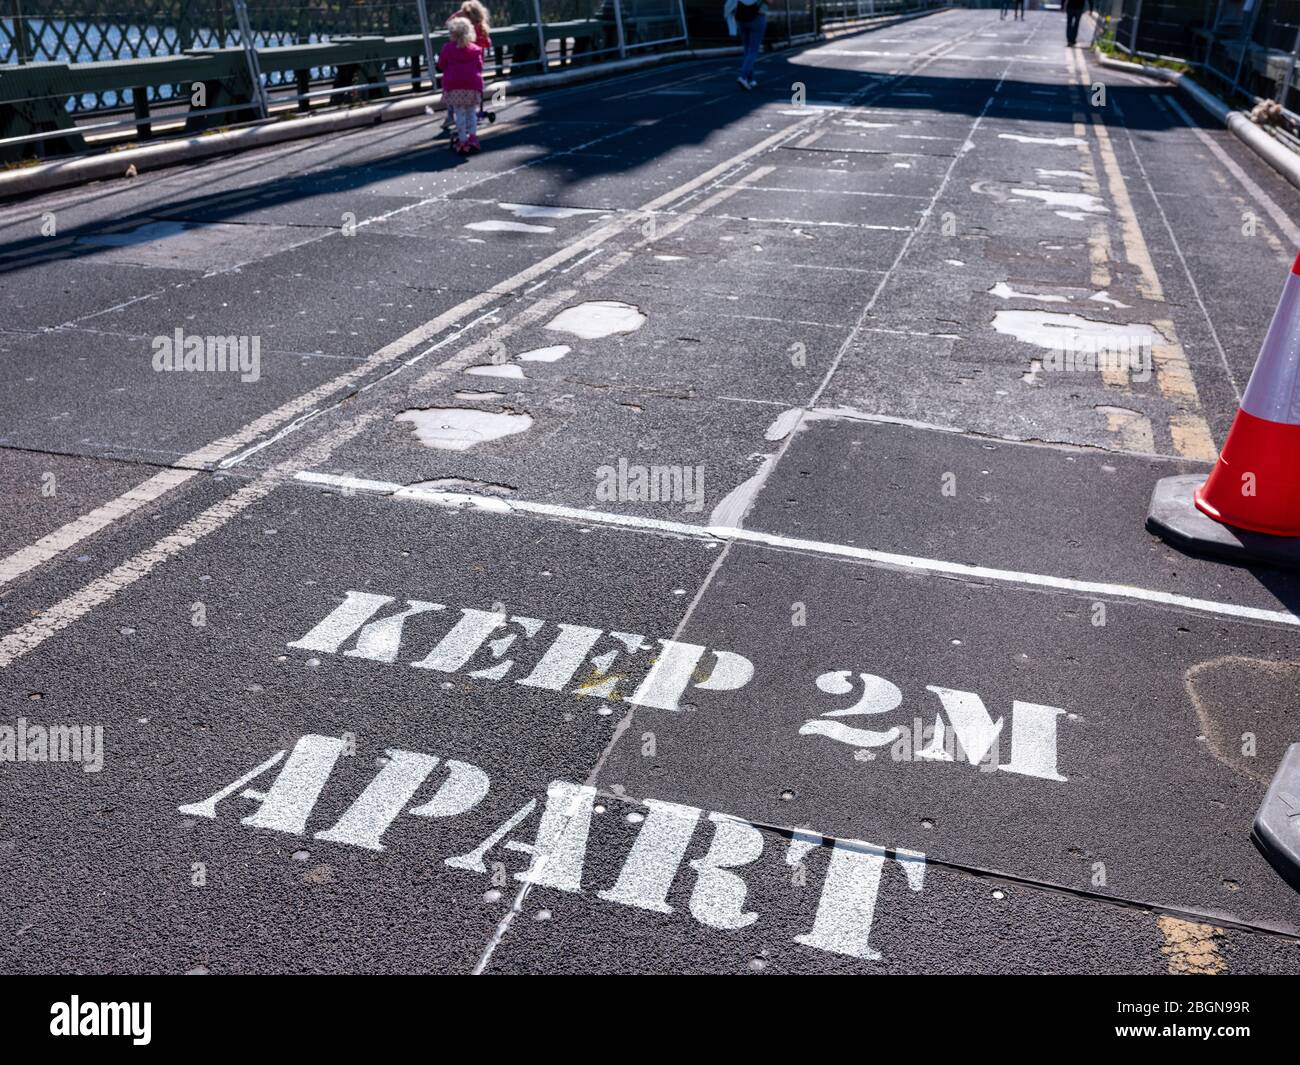 5th April 2020 A sign painted on the road surface warns pedestrians to keep their distance in order to prevent the Covid-19 virus spreading. Two young Stock Photo